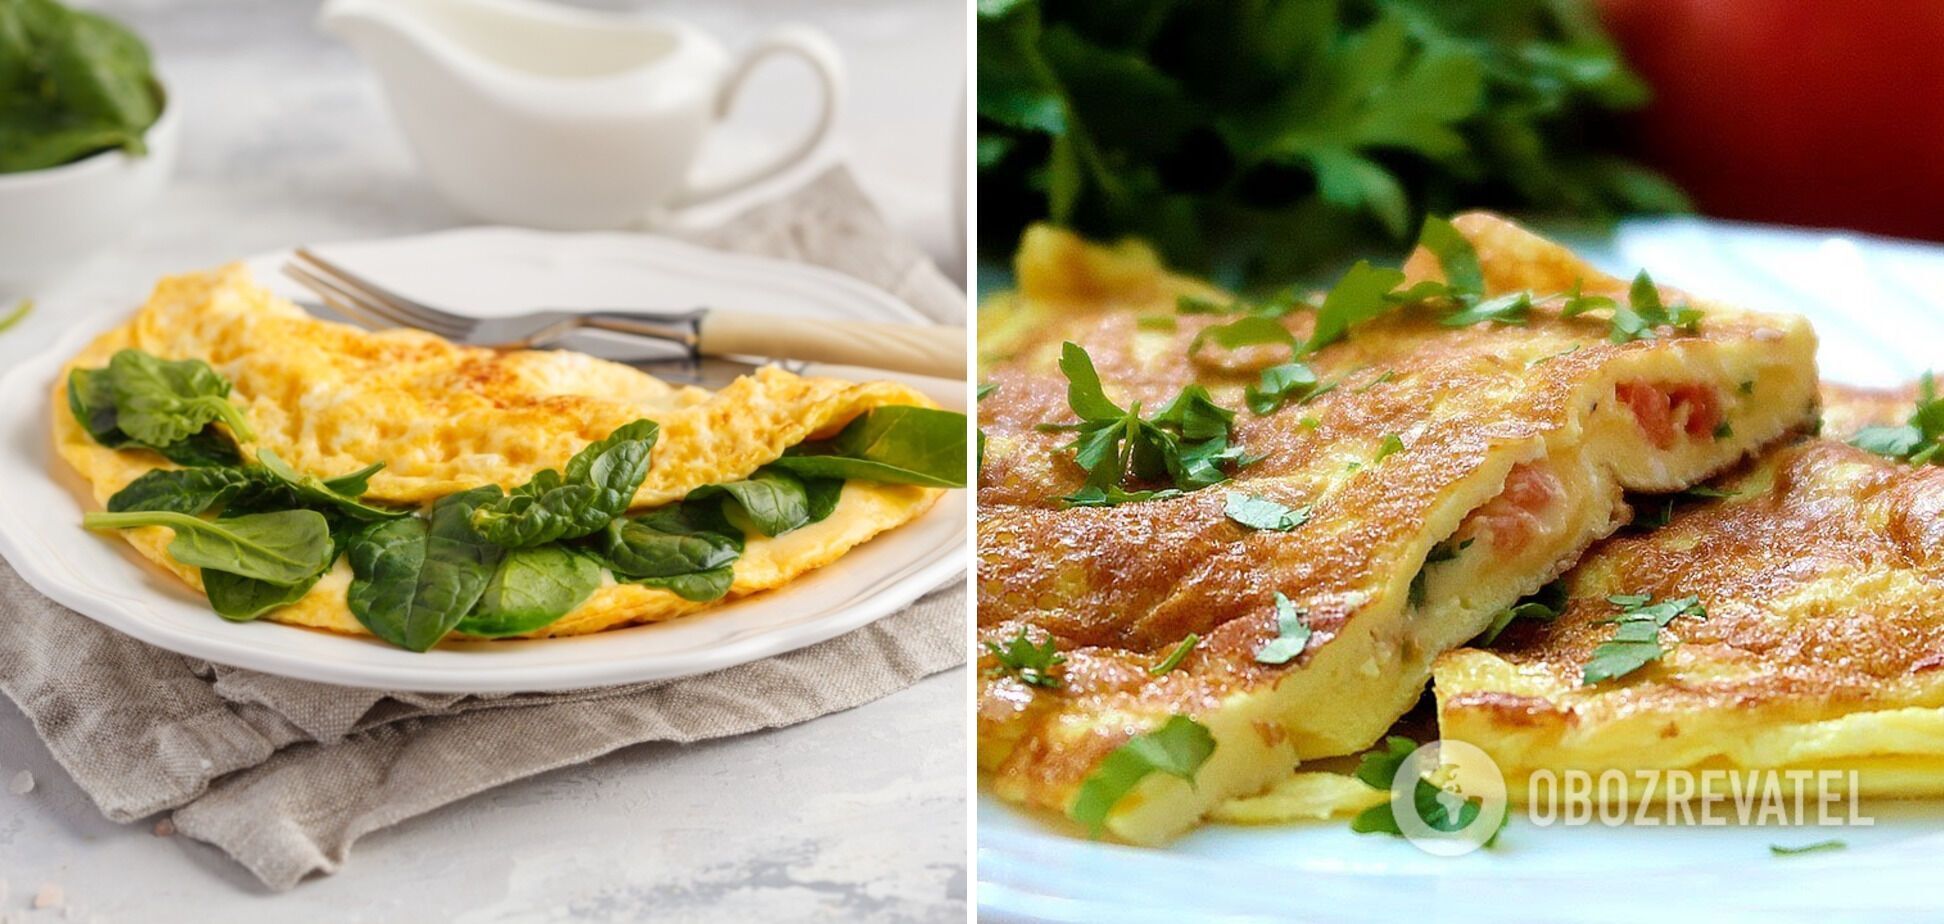 How to make puffy omelet